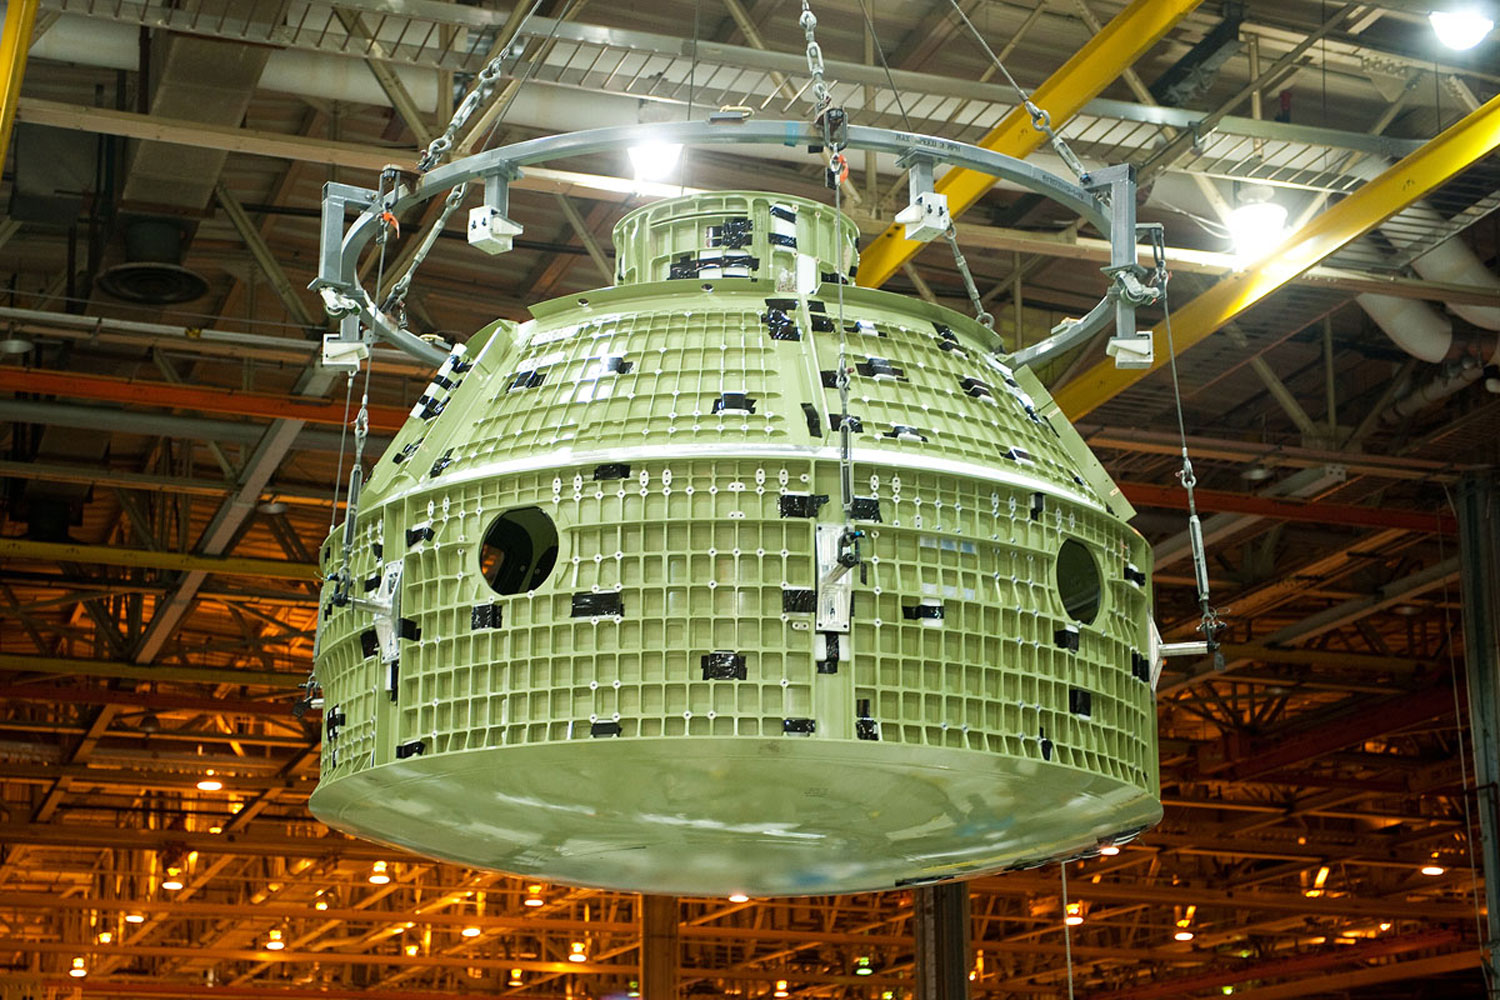 The NASA team at the Michoud Assembly Facility in New Orleans has completed the final weld on the first space-bound Orion capsule, on June 22, 2012. The crew compartment is within this structure, which is then enclosed in the conical exterior.